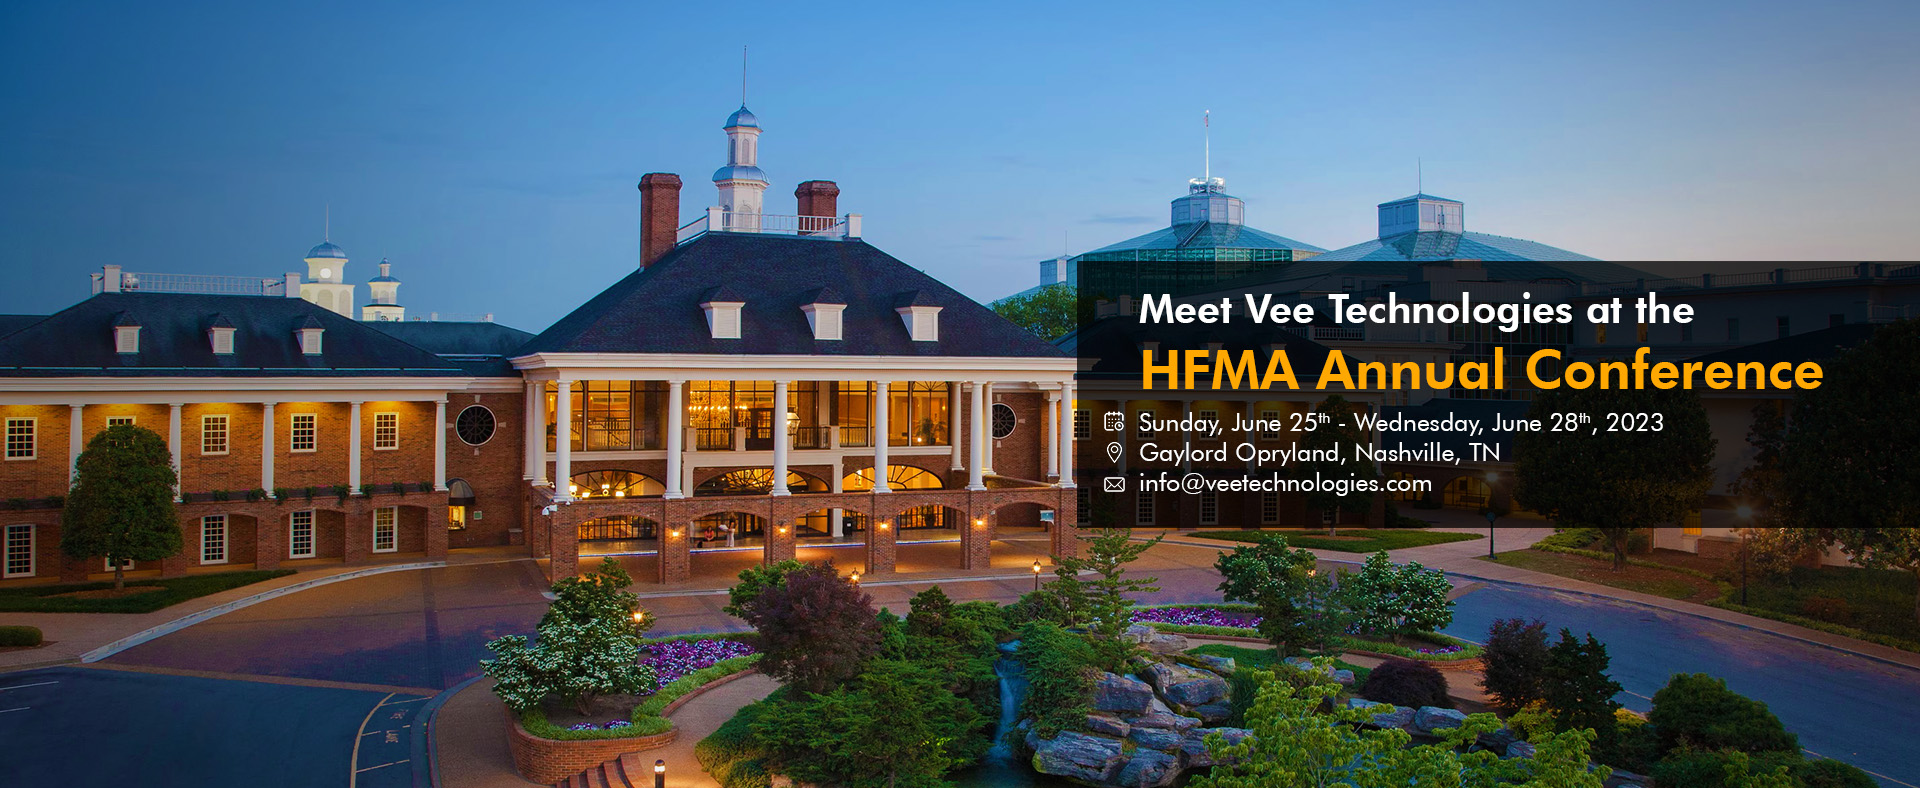 HFMA Annual Conference 2023